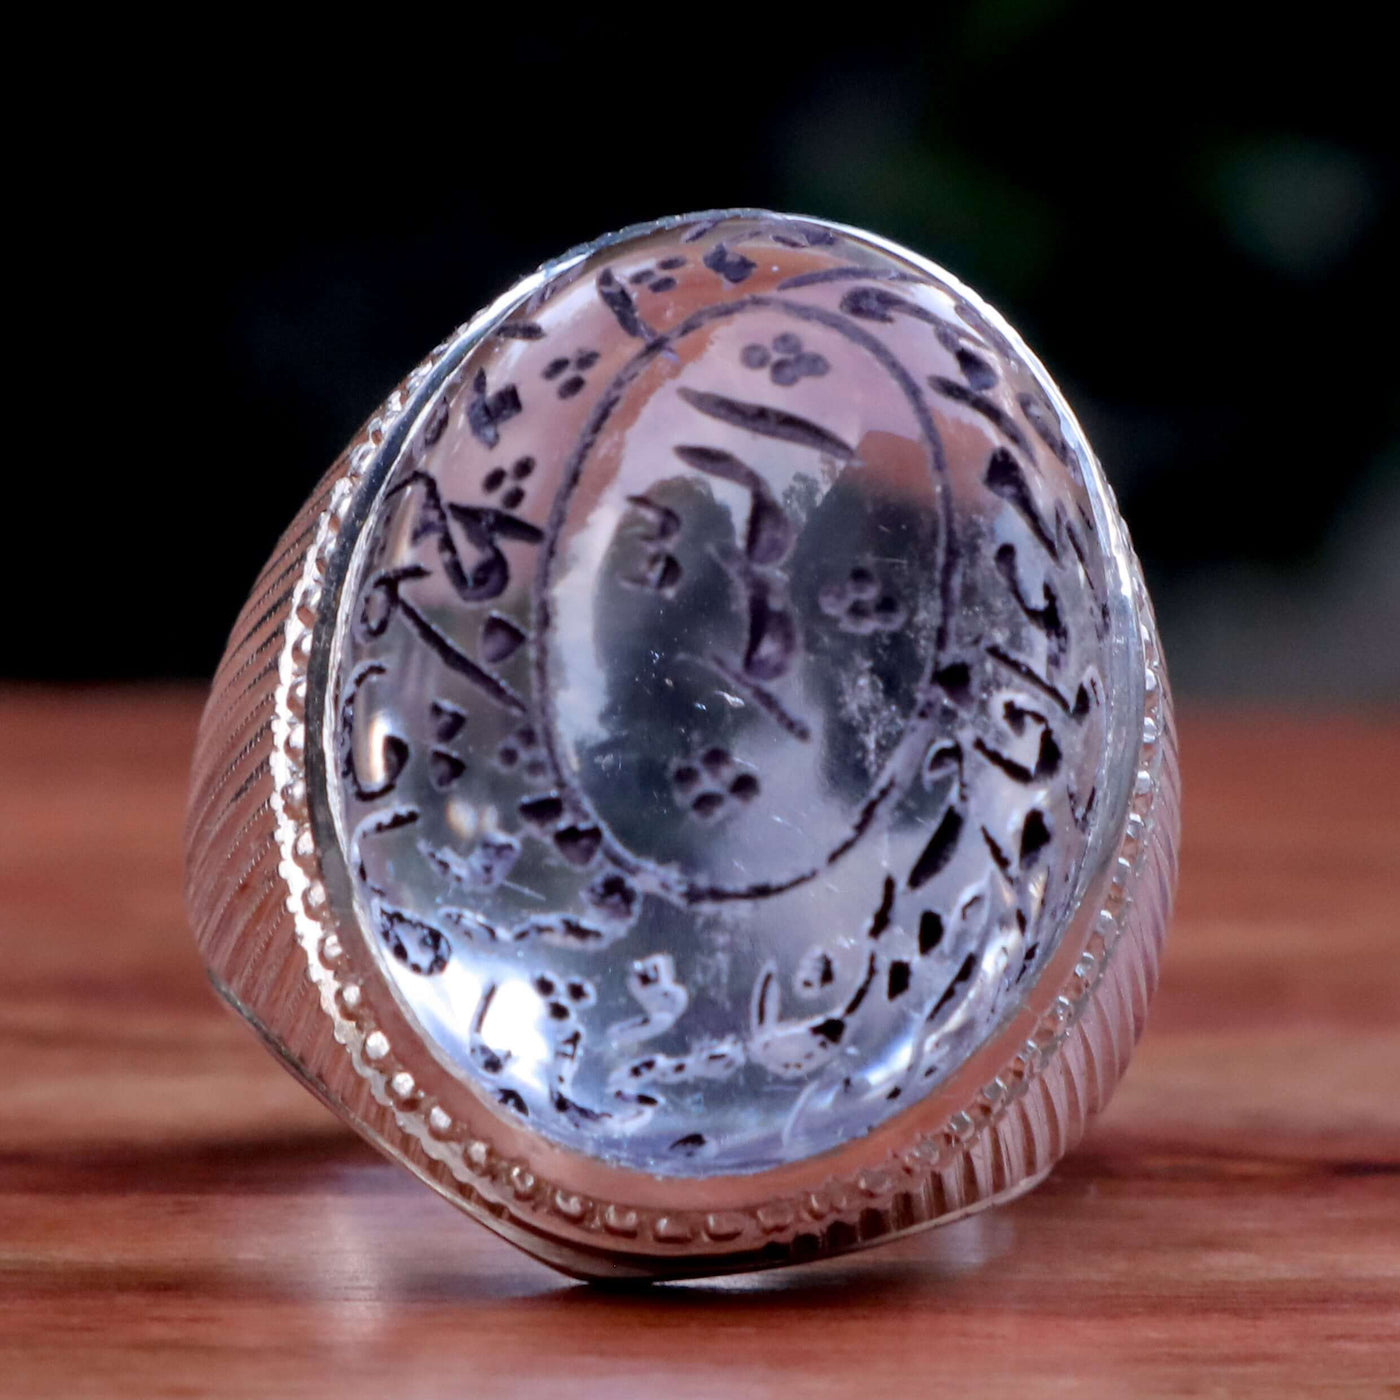 Handmade Dur e Najaf Ring Sterling Silver 92.5 | Original Dur Alnajaf Stone Engraved with Allah Named And Ahlulbayt Names with the full 12 Imams PBUT | US Size 9.5 - AlAliGems